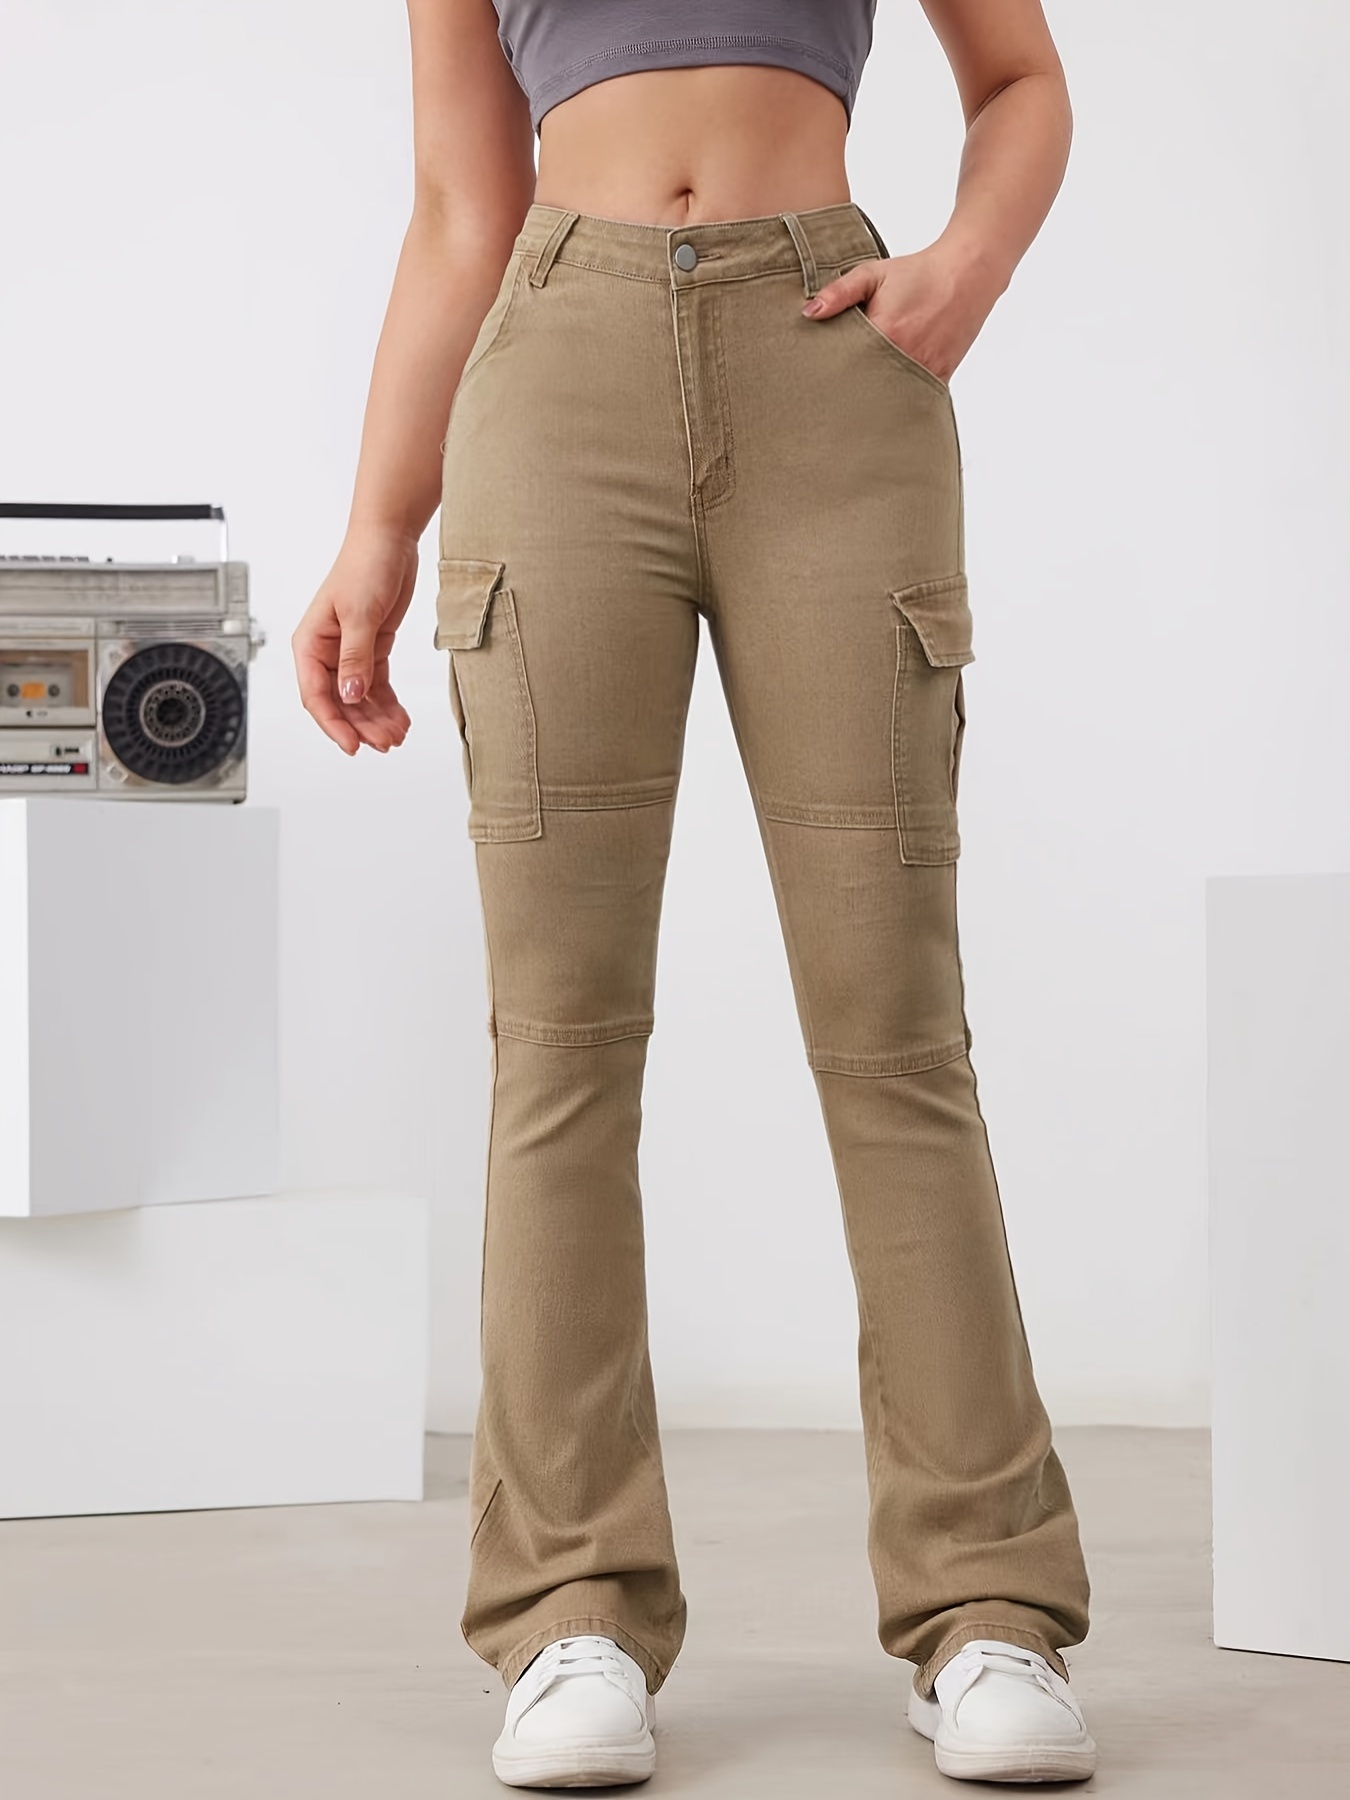 Solid Pocket Cargo Pants, Casual Button Front Pants, Women's Clothing